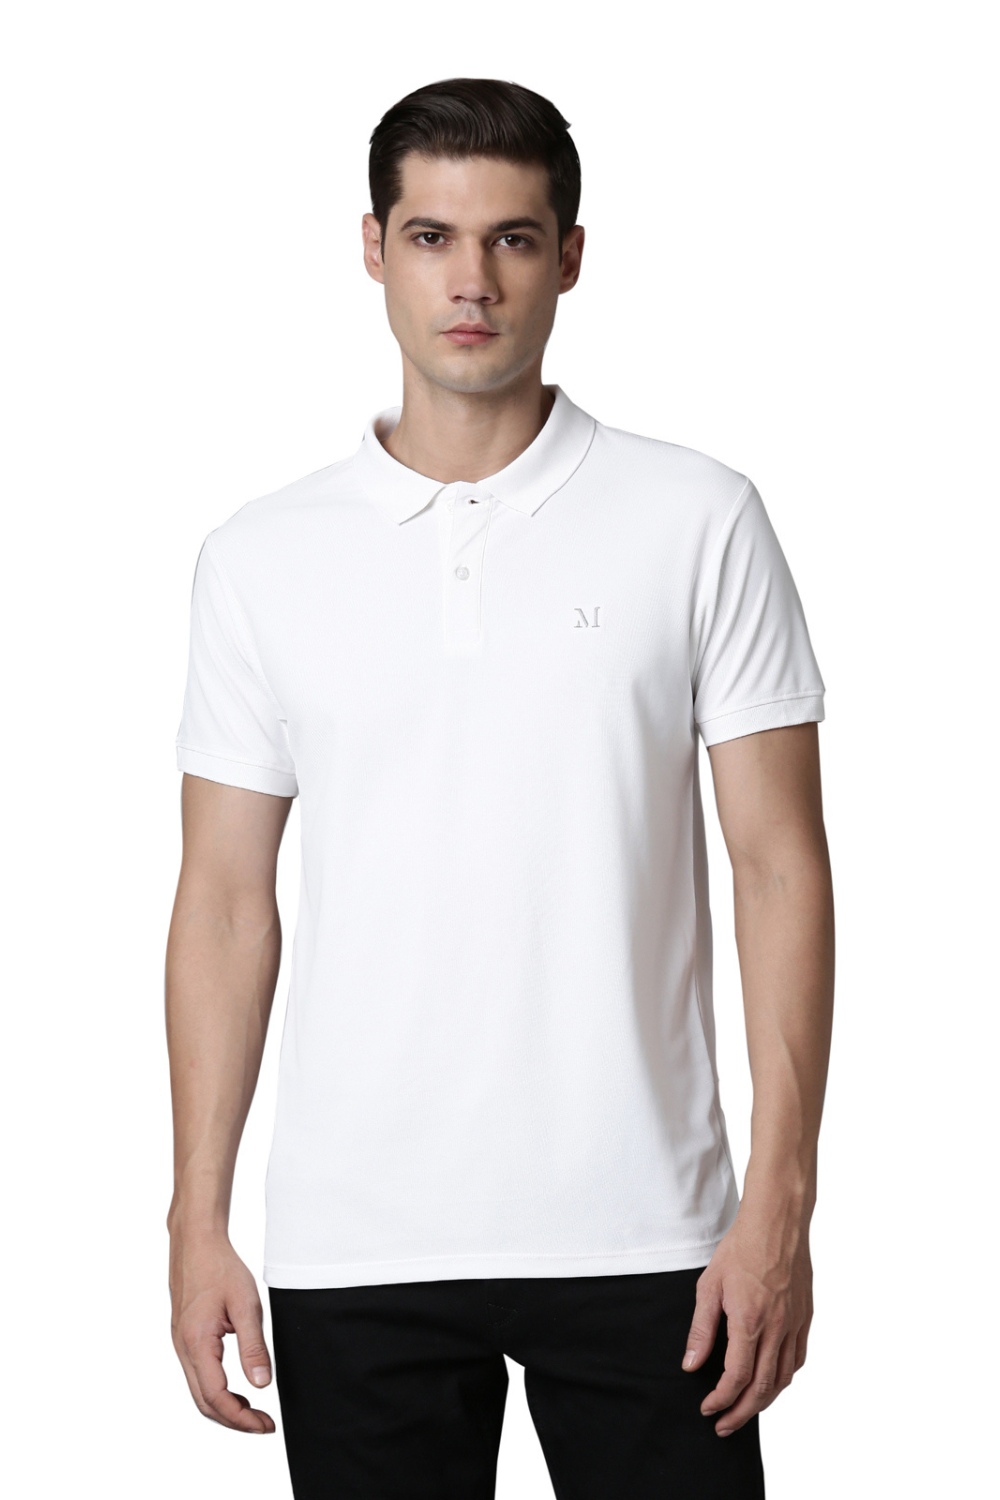 Smart Tech Polo-White Combo Pack of 5  Maxzone Clothing   